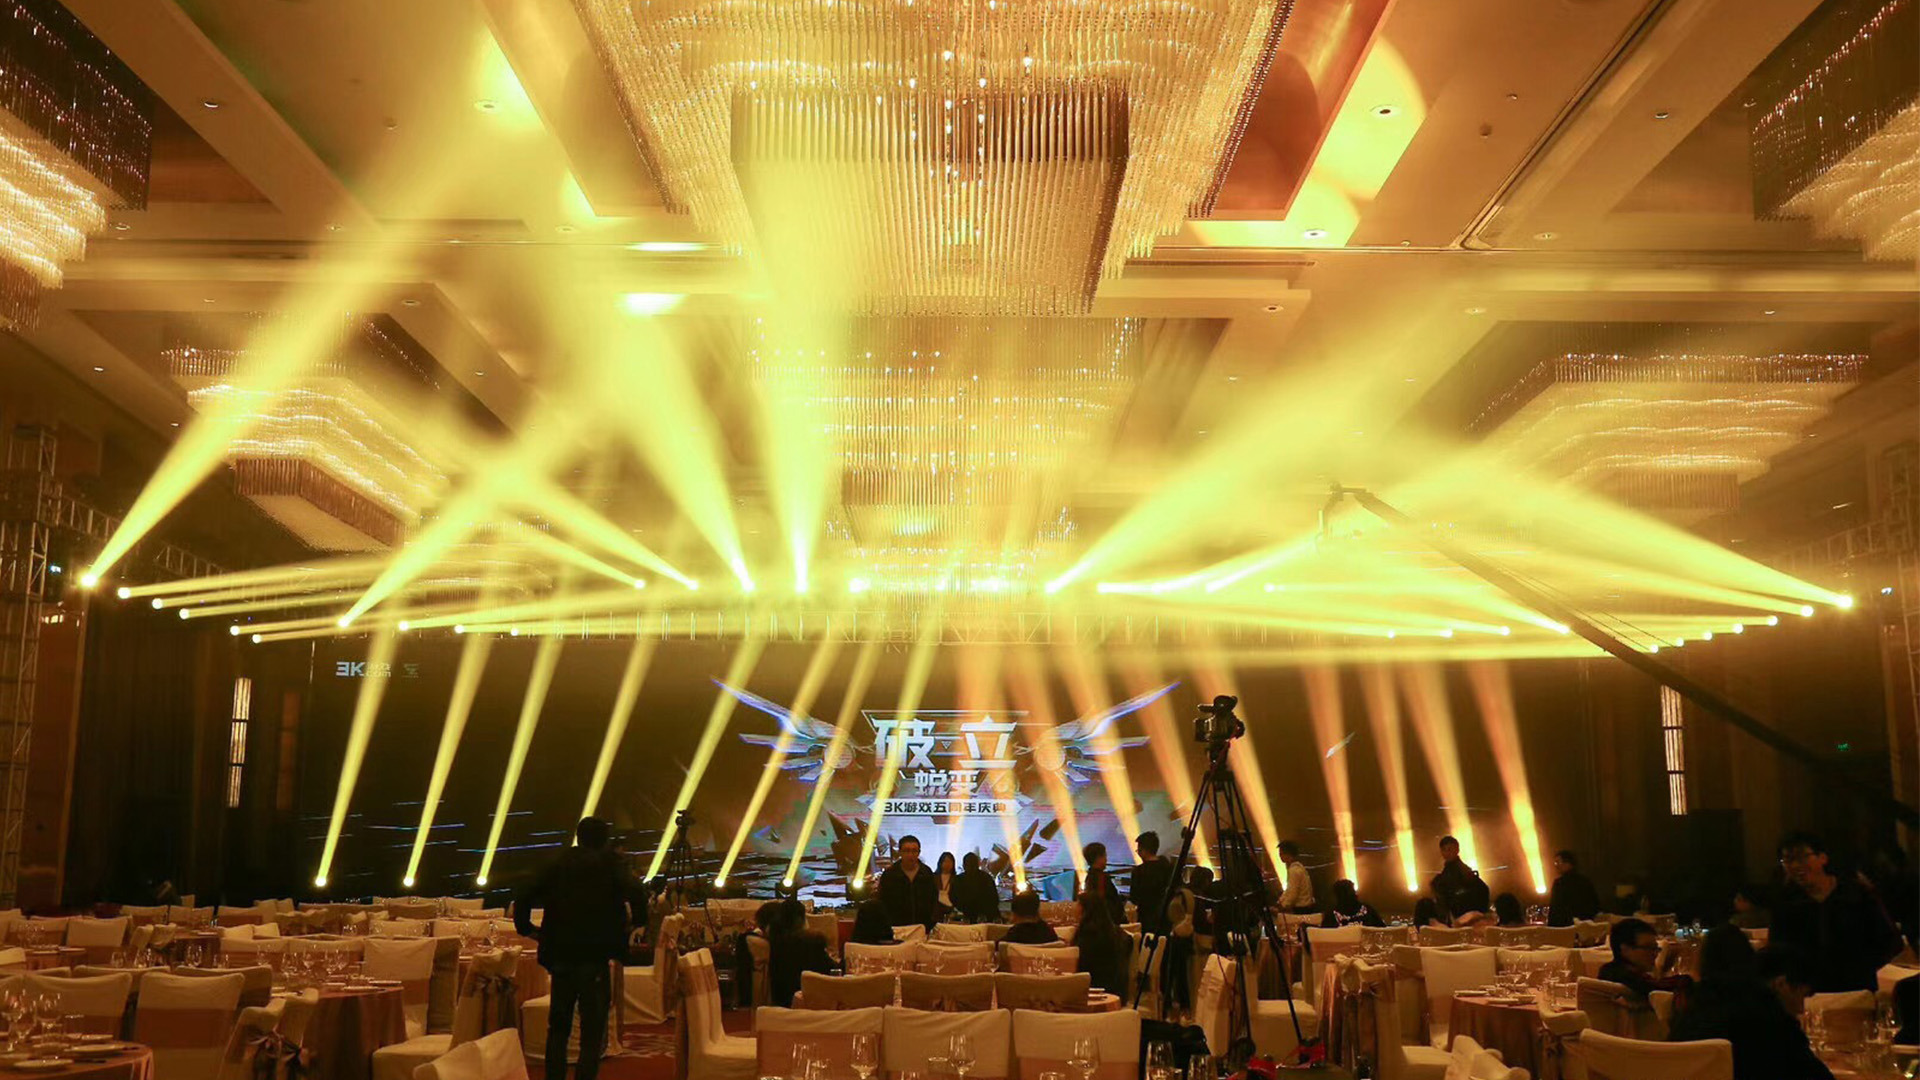 It is an annual event and annual dinner for 3K.com by D2 Studio Event Planner Event Agency Event Planner Hong Kong and Guangzhou China who does Event Planning, Annual Event, Annual Dinner. 5